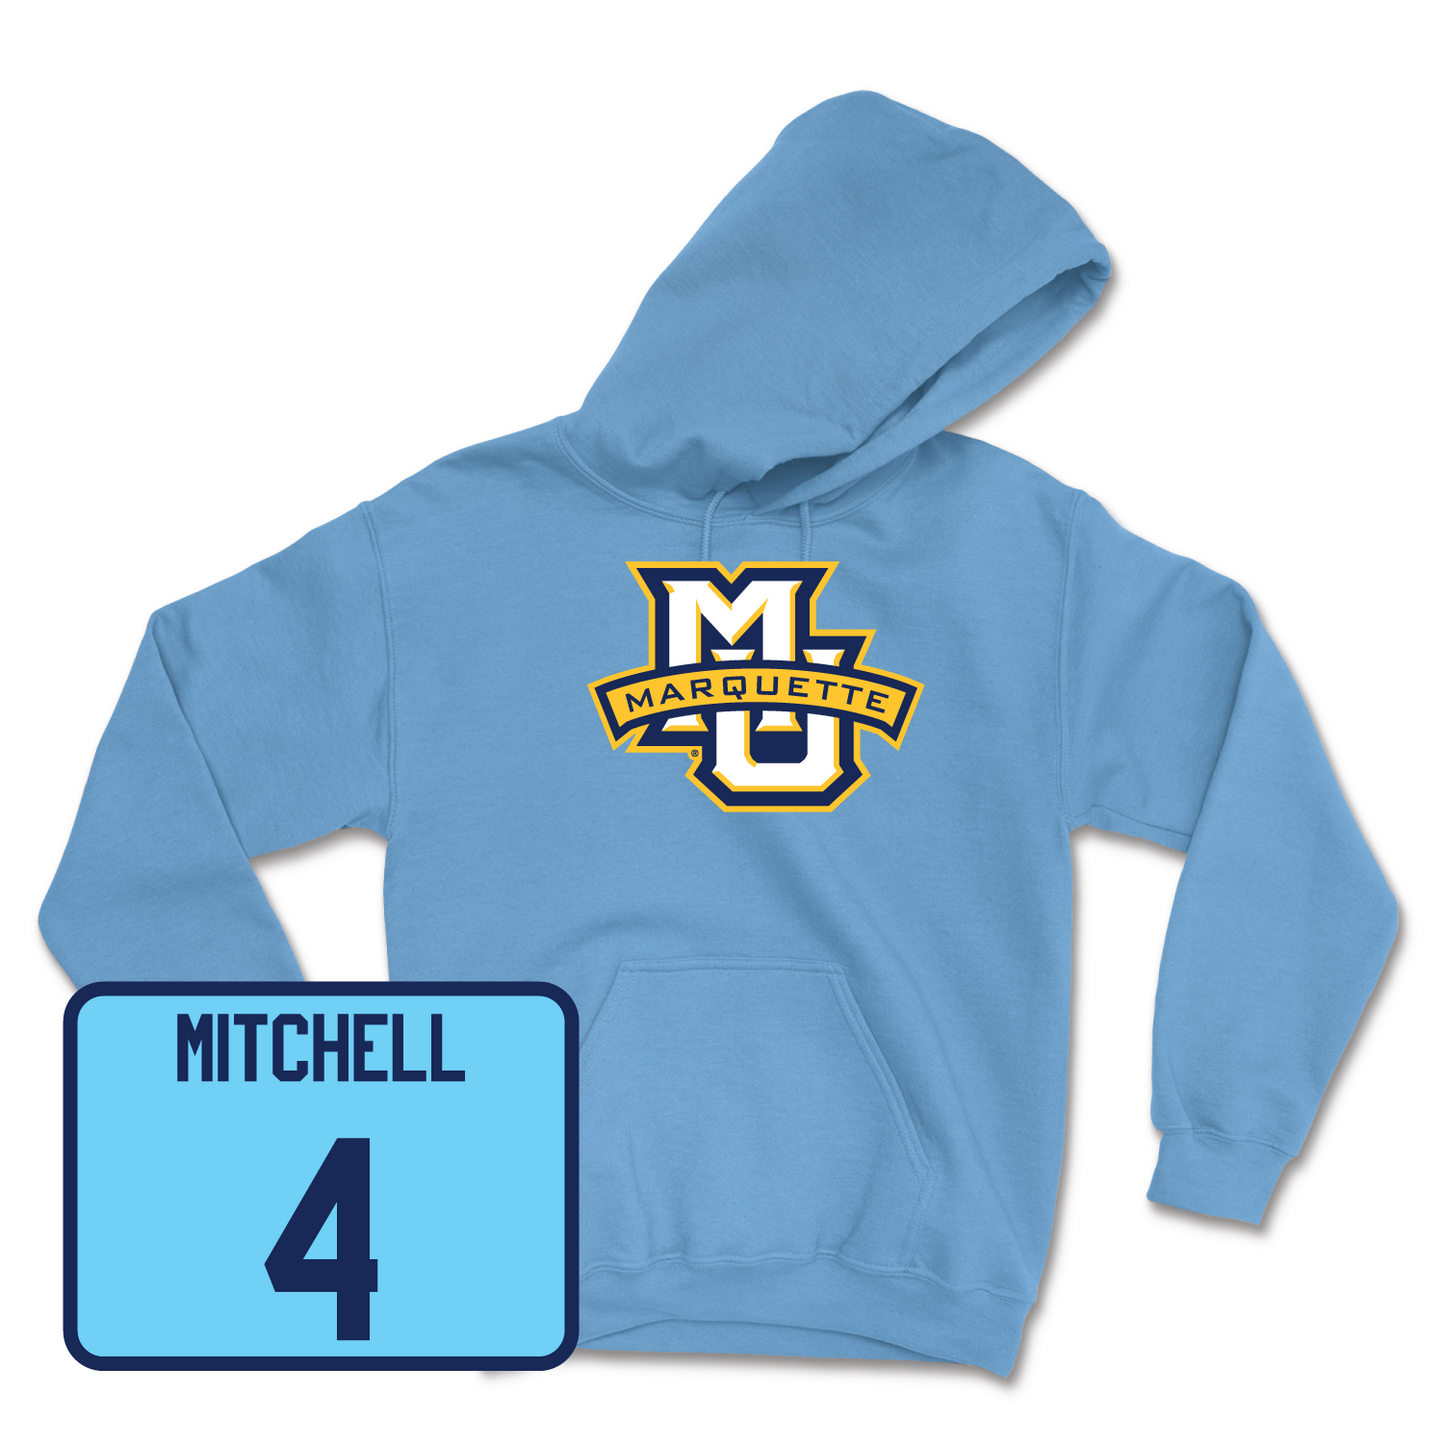 Championship Blue Men's Basketball Marquette Hoodie 2 Youth Large / Stevie Mitchell | #4